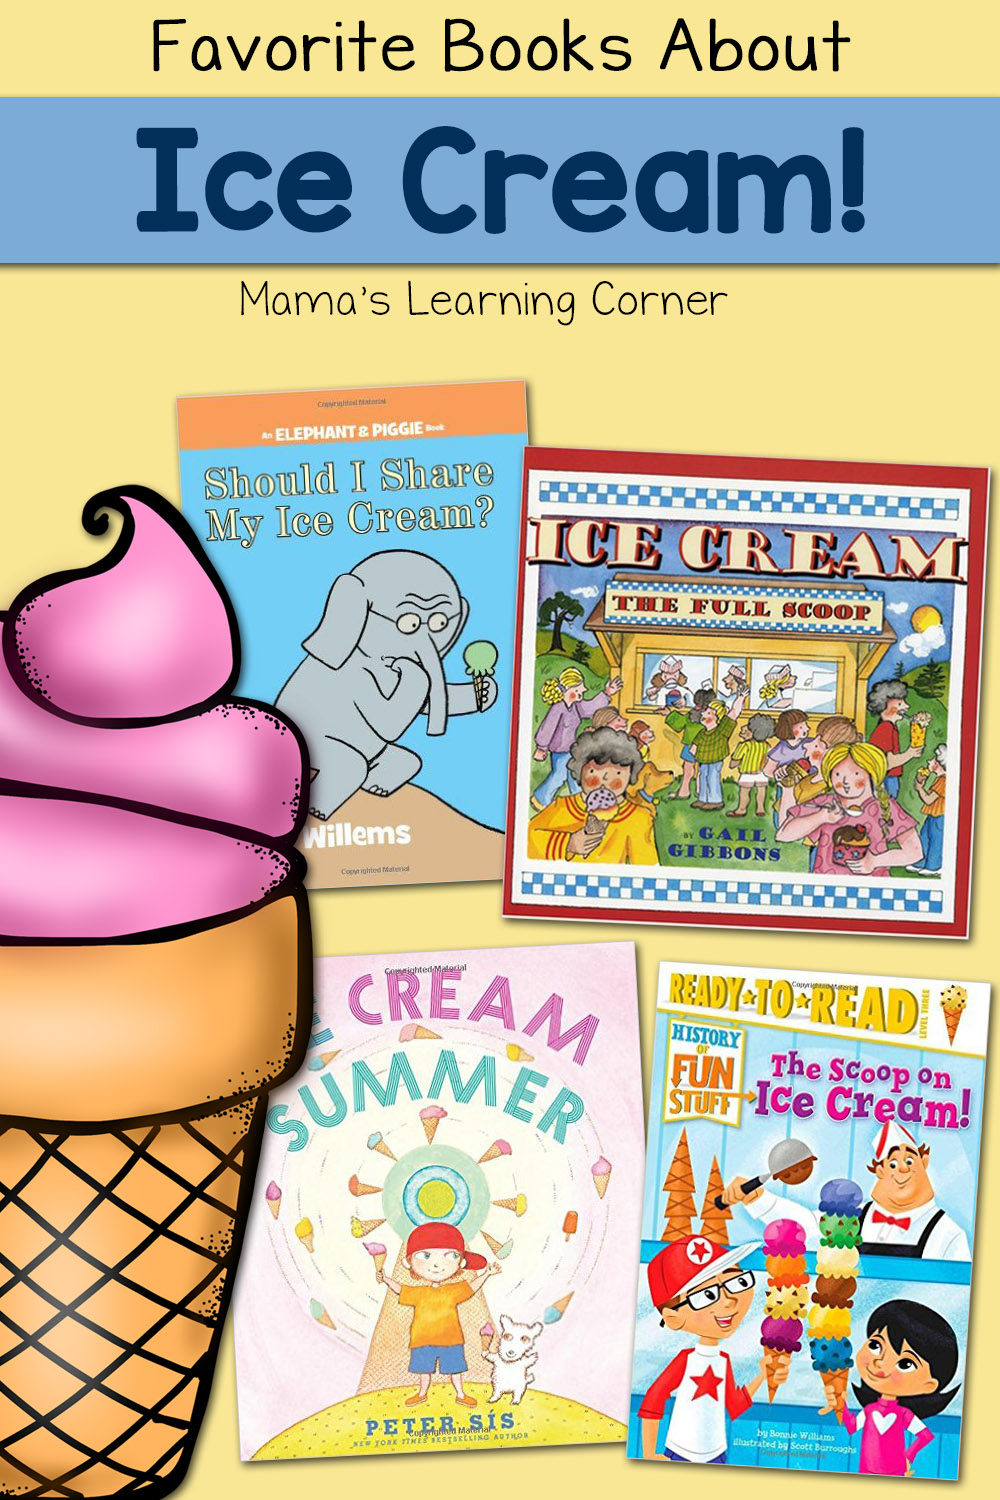 Favorite Books About Ice Cream - Mamas Learning Corner